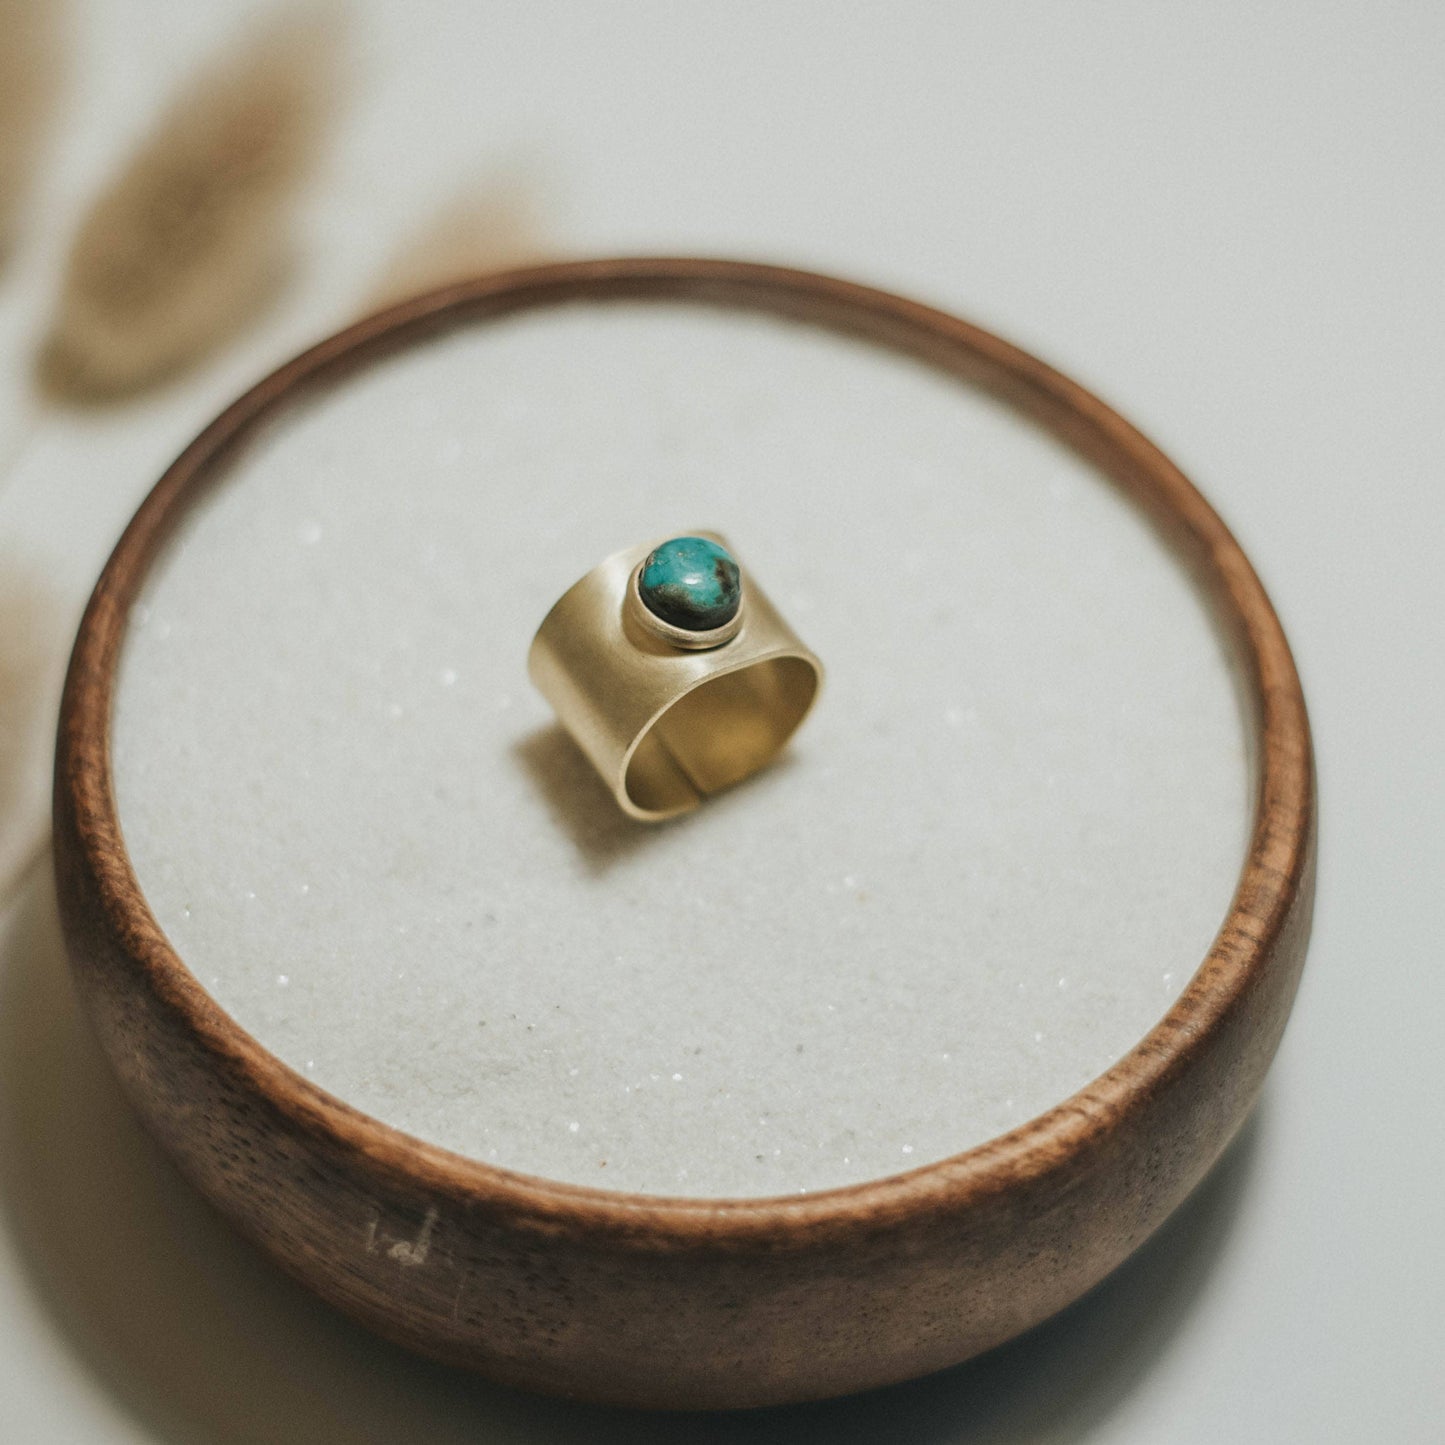 Nile Adjustable Solid Brass Single Stone Ring with Turquoise by Commonform